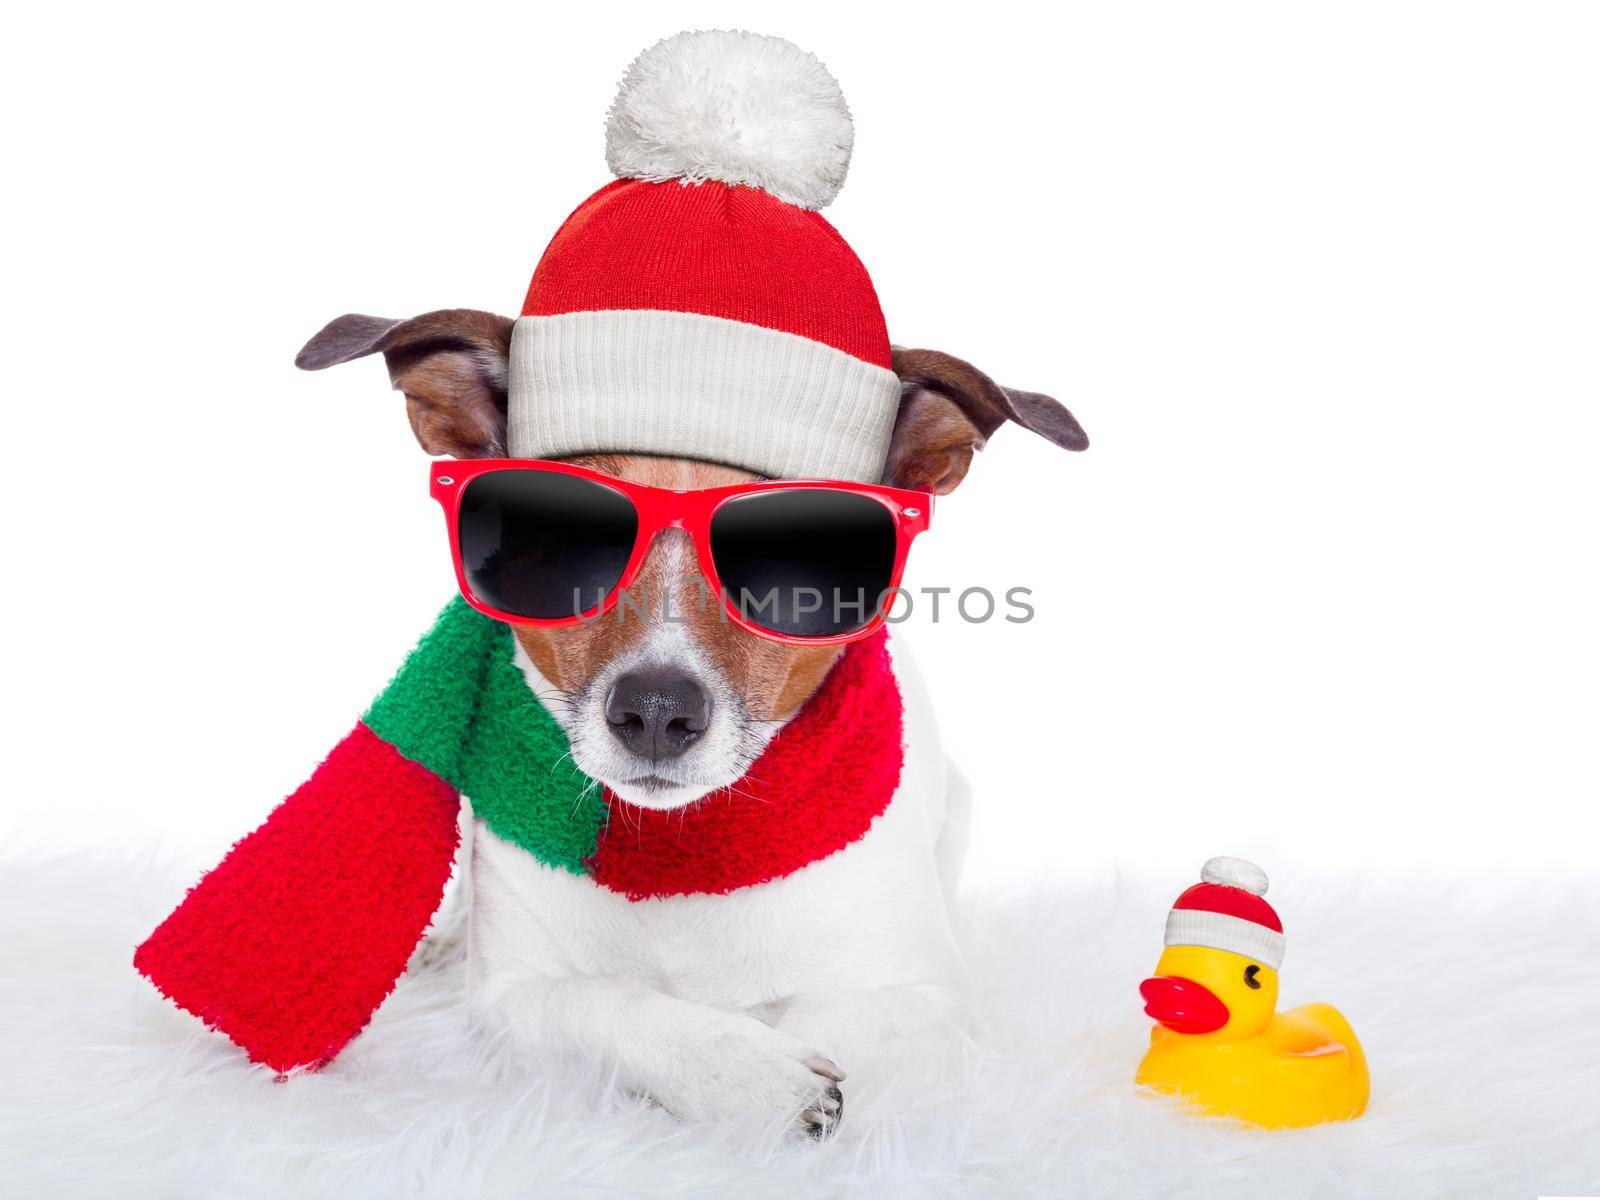 christmas dog resting on a white carpet and a rubber duck